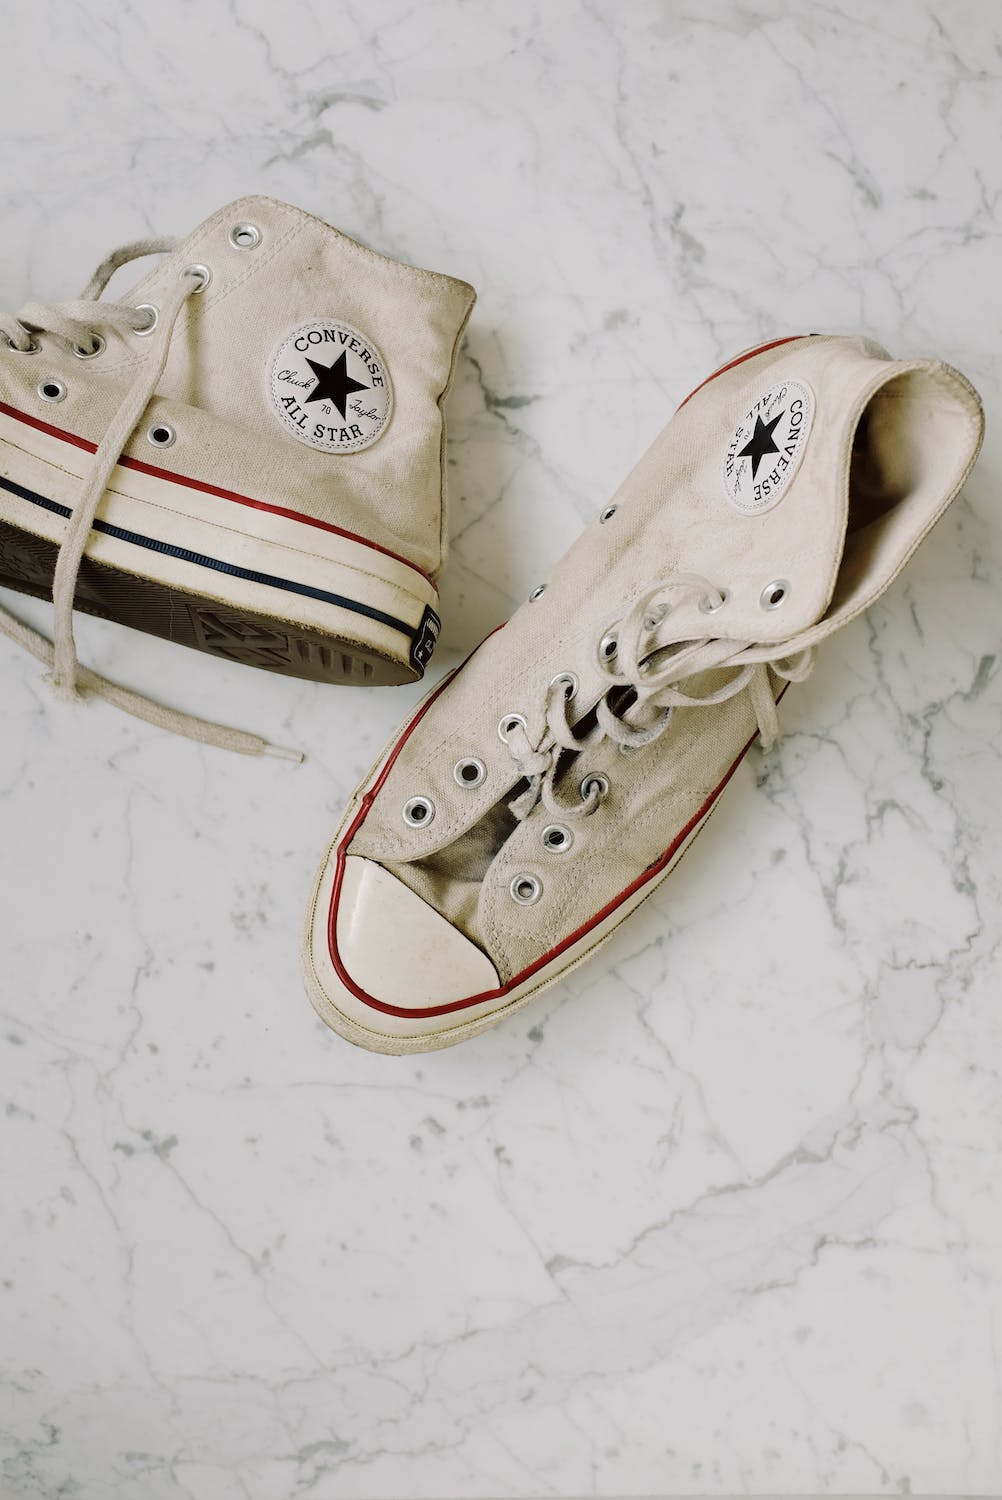 Used white converse sneakers